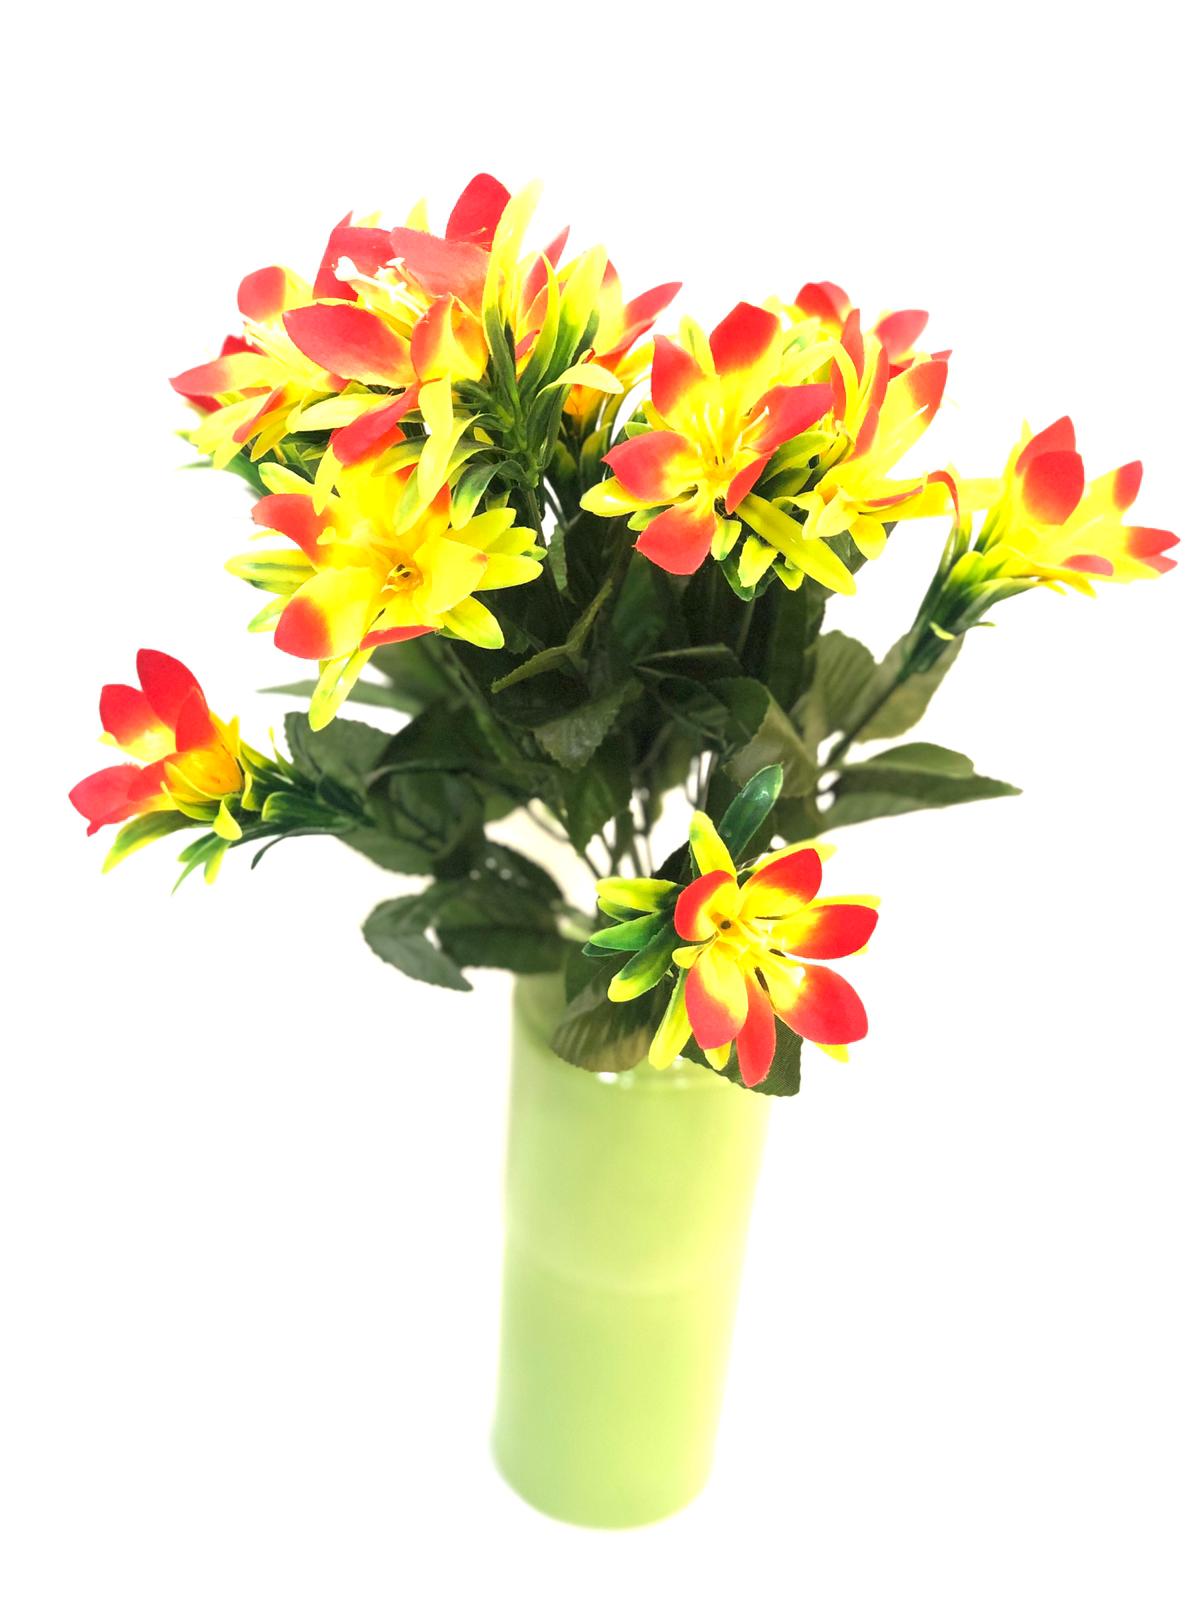 Flower Sticks Bunch Of Lilly Plant Exclusive Garden Collection By Tamrapatra